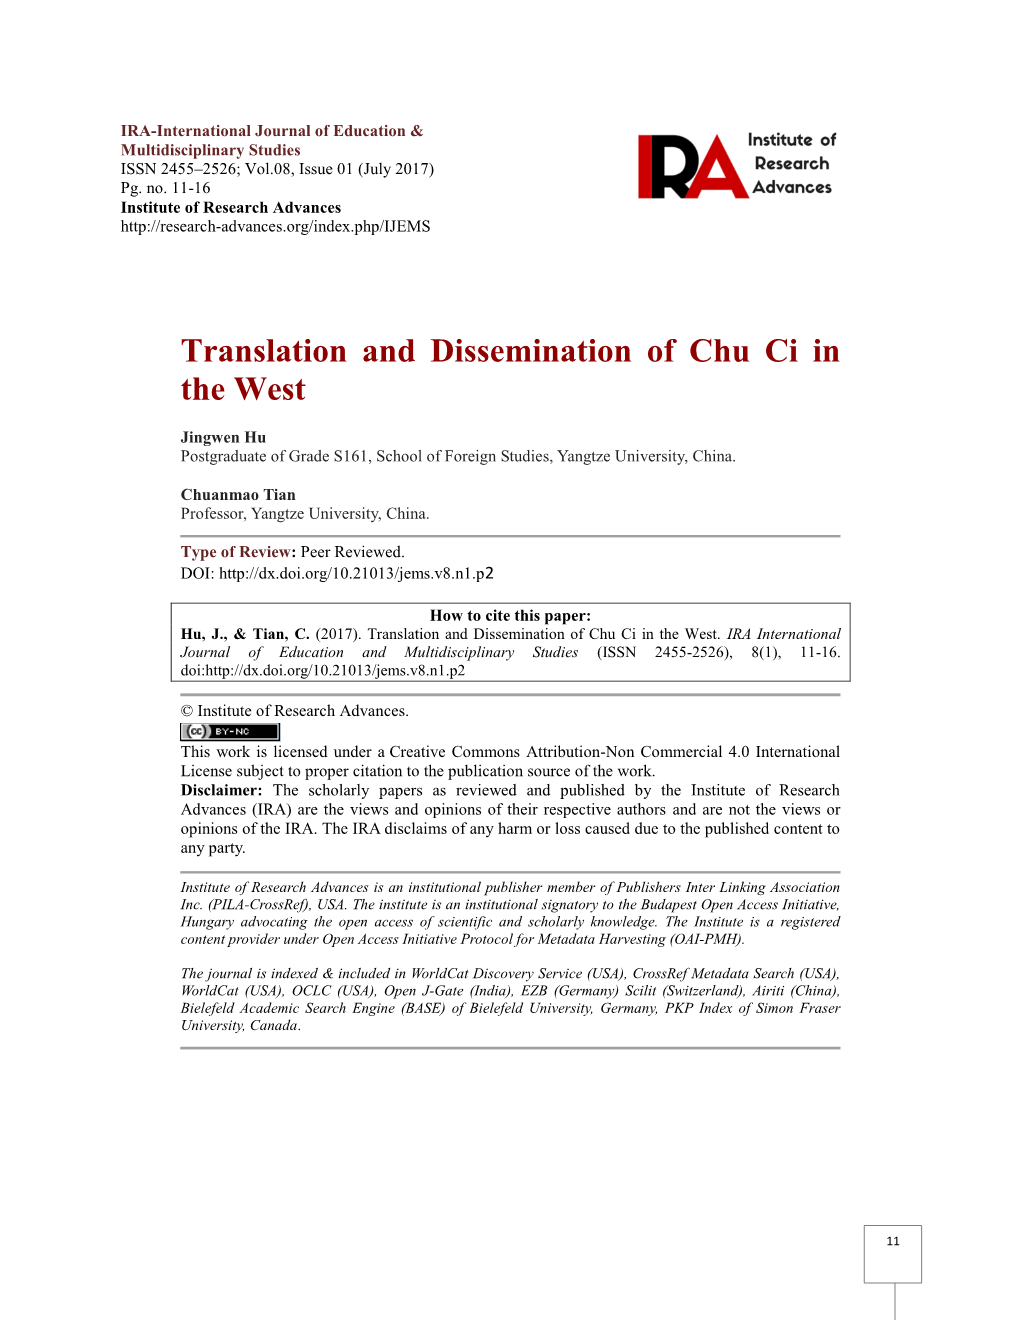 Translation and Dissemination of Chu Ci in the West